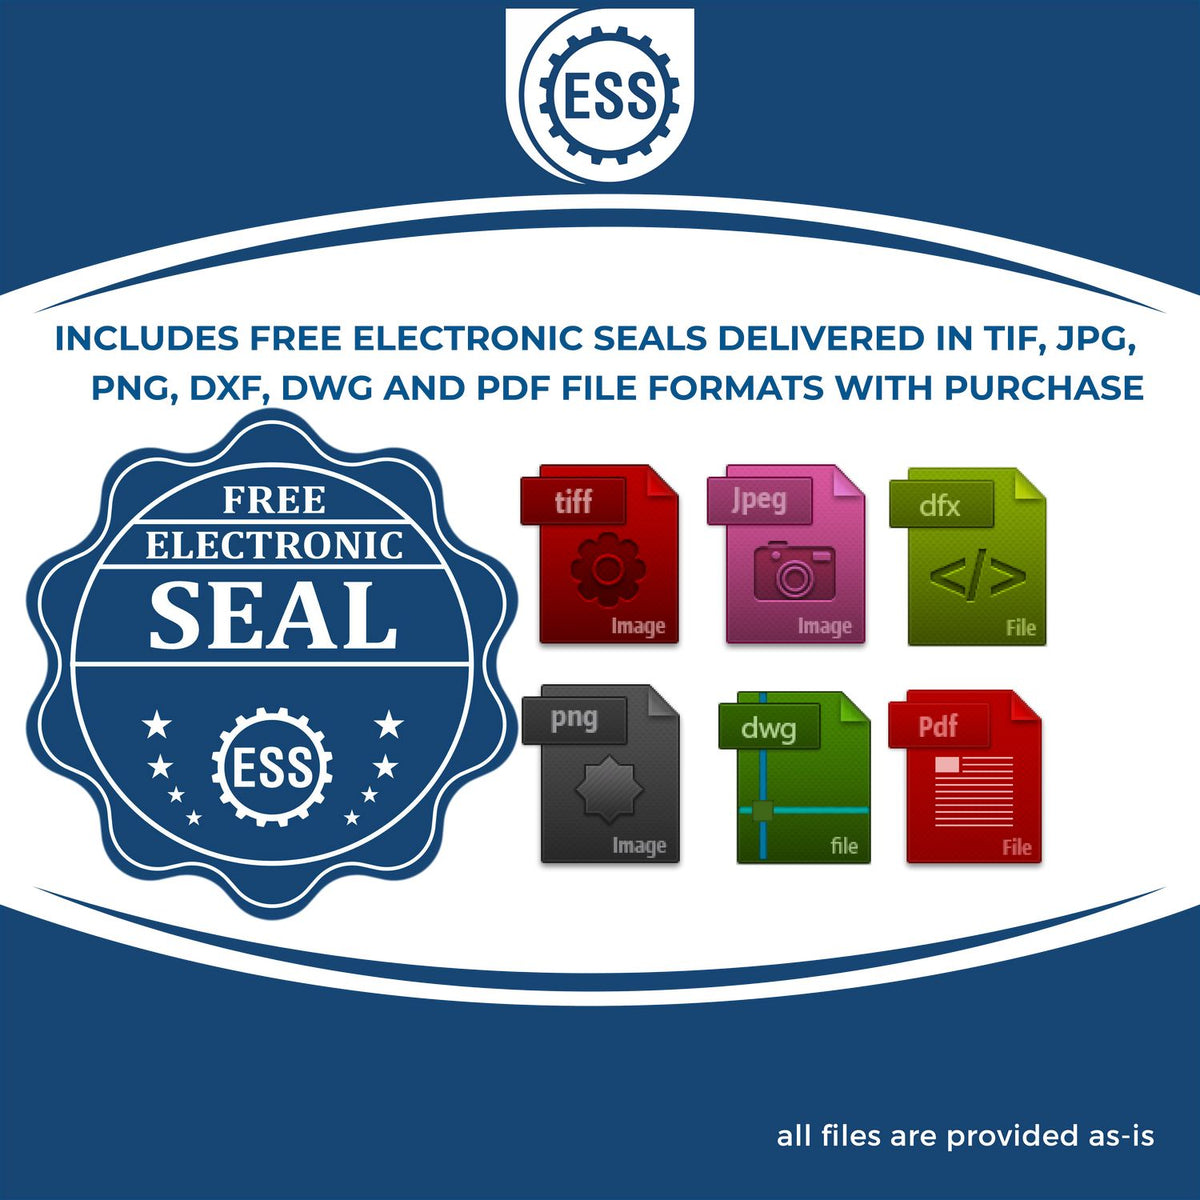 An infographic for the free electronic seal for the Extended Long Reach Pennsylvania Architect Seal Embosser illustrating the different file type icons such as DXF, DWG, TIF, JPG and PNG.